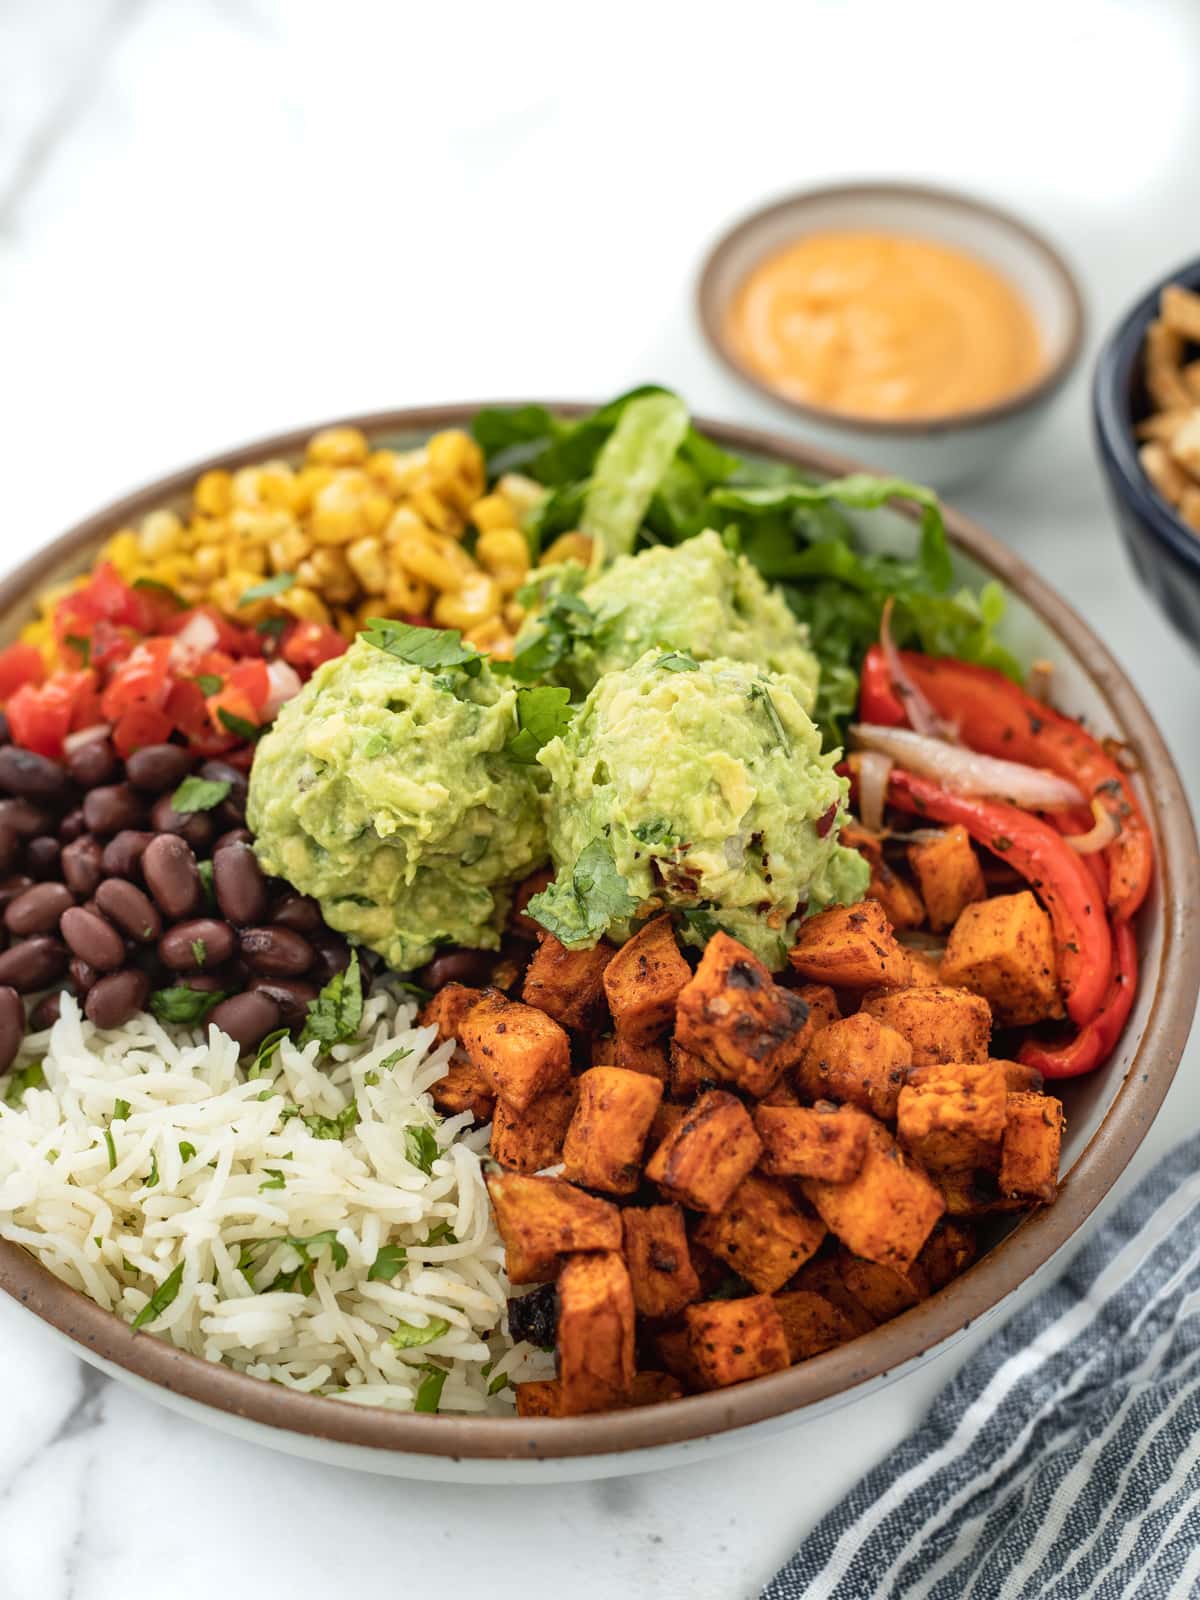 Sweet potato and black bean burrito bowl topped with guacamole and charred corn.